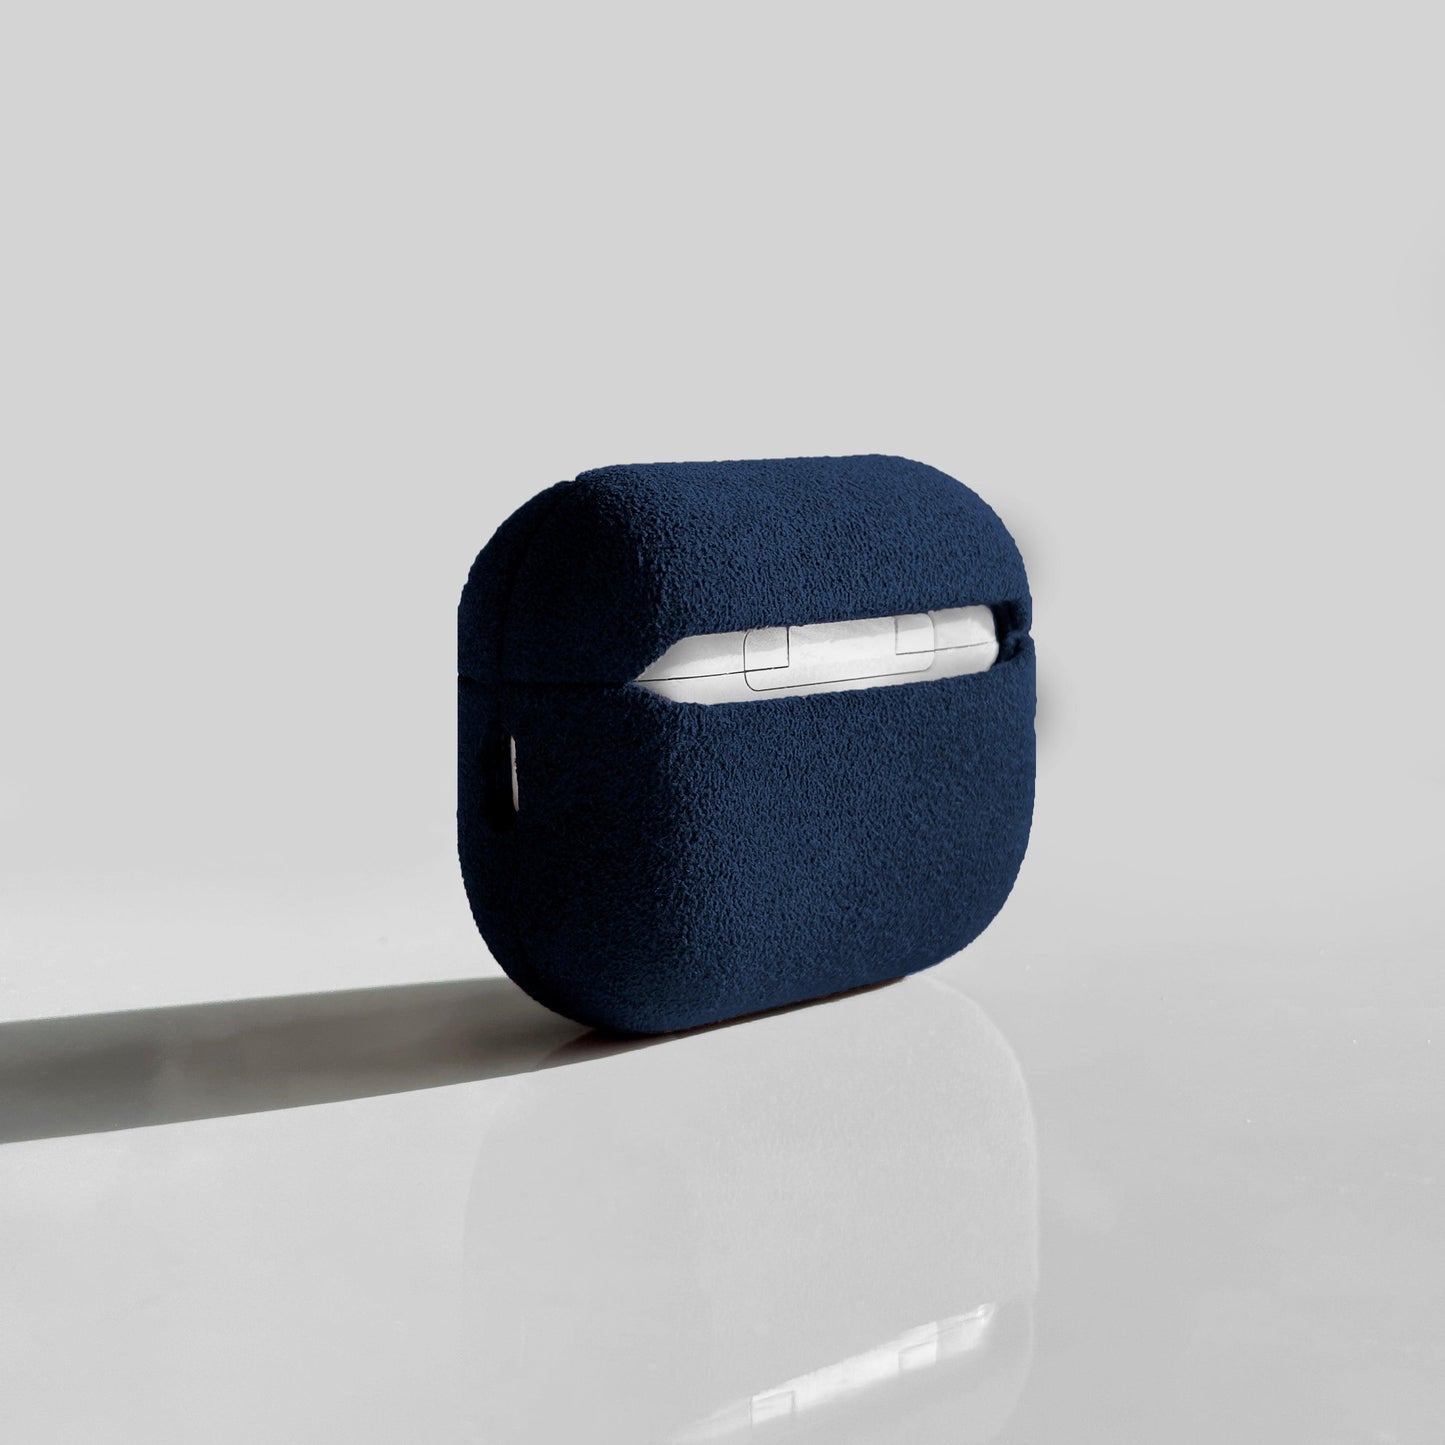 Alcantara Suede Leather iPhone Case and Accessories Collection - The AirPods Pro Case - Dark Blue - Luriax